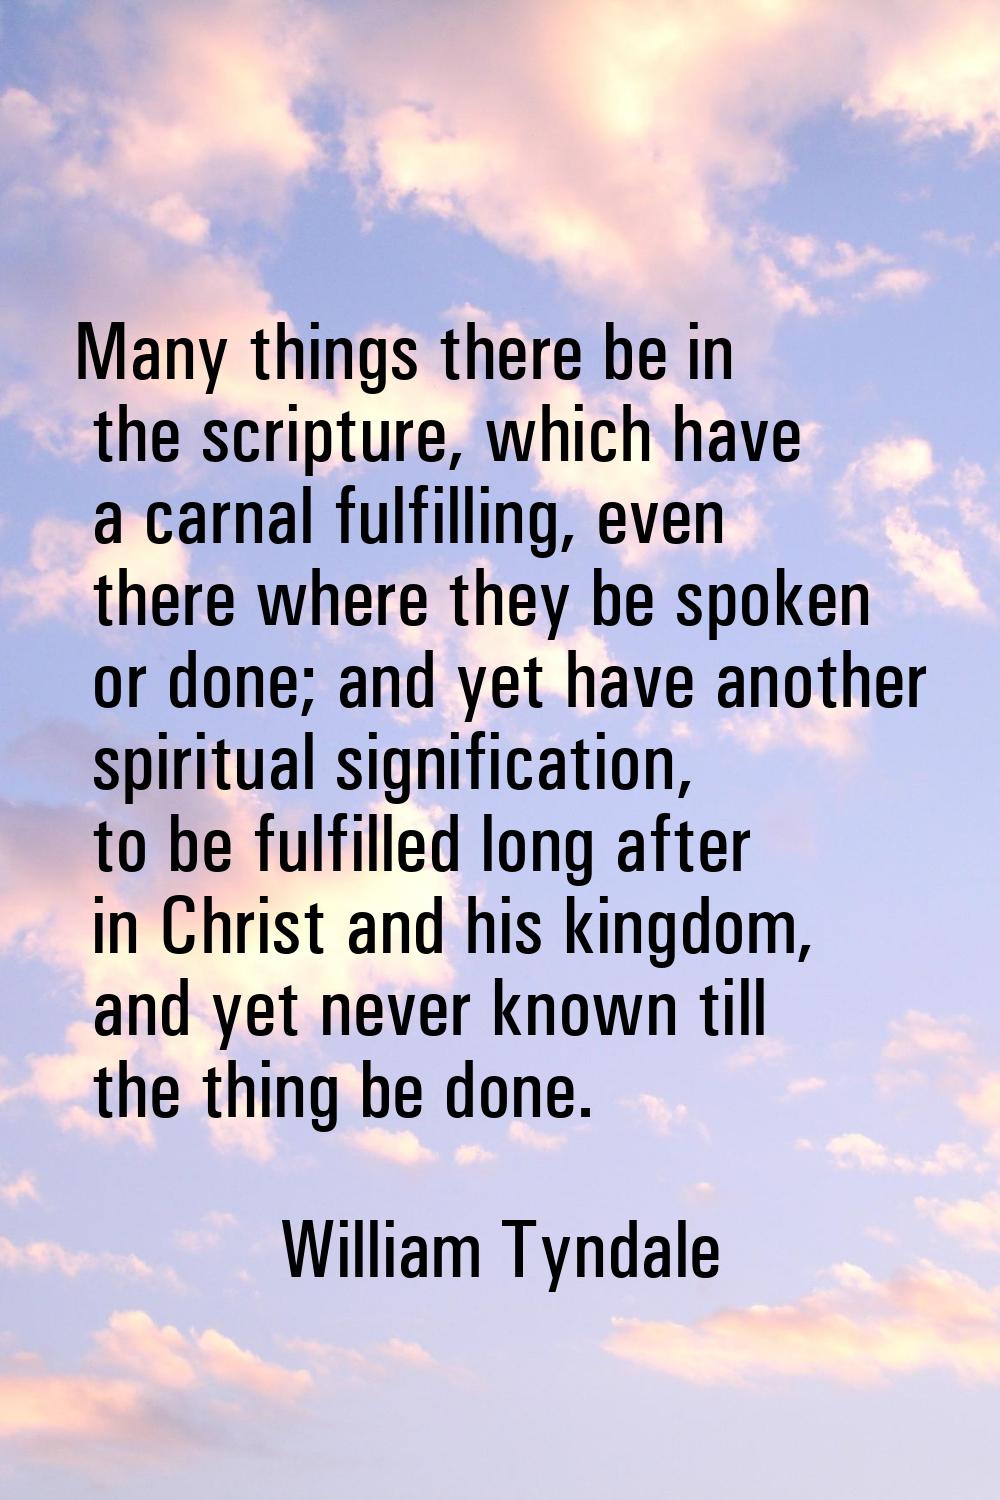 Many things there be in the scripture, which have a carnal fulfilling, even there where they be spo